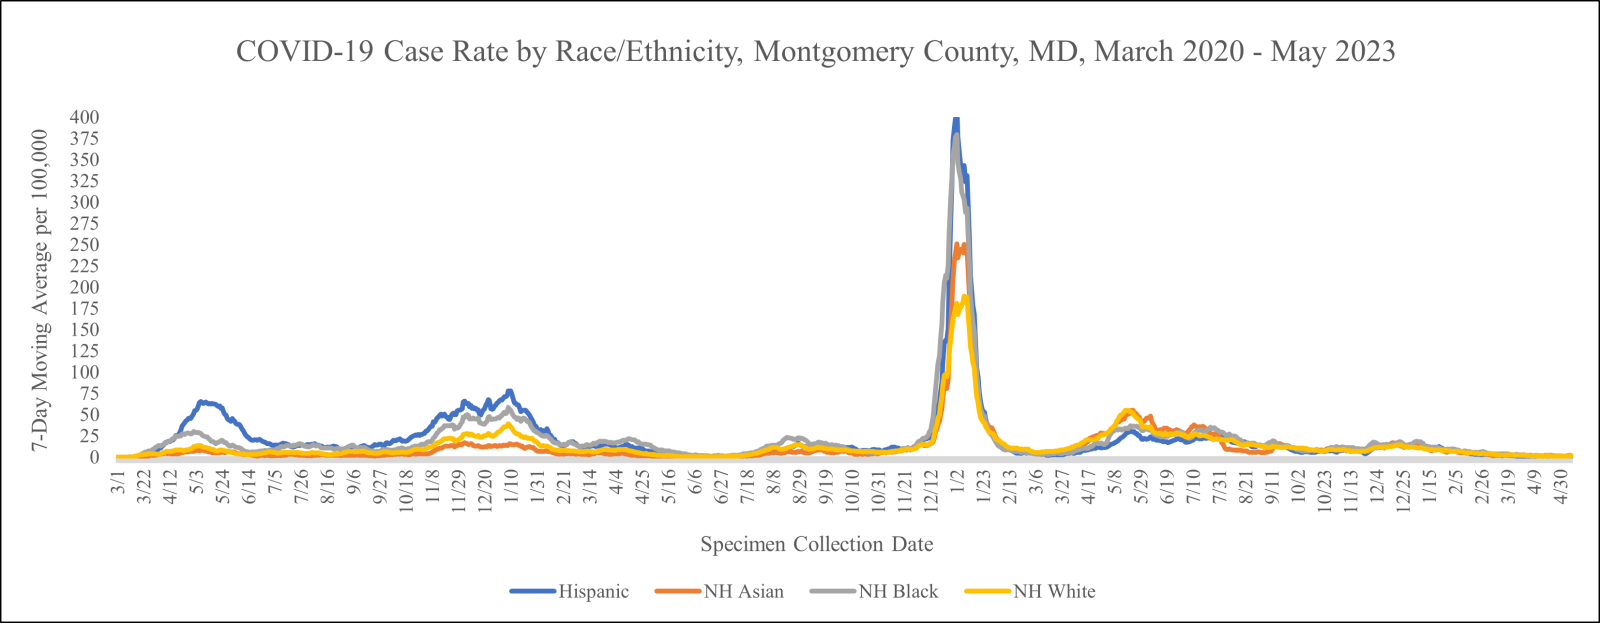 Graph: COVID-19 Case Rate by Race/Ethnicity from March 2020 to date. Download data files for more detail.